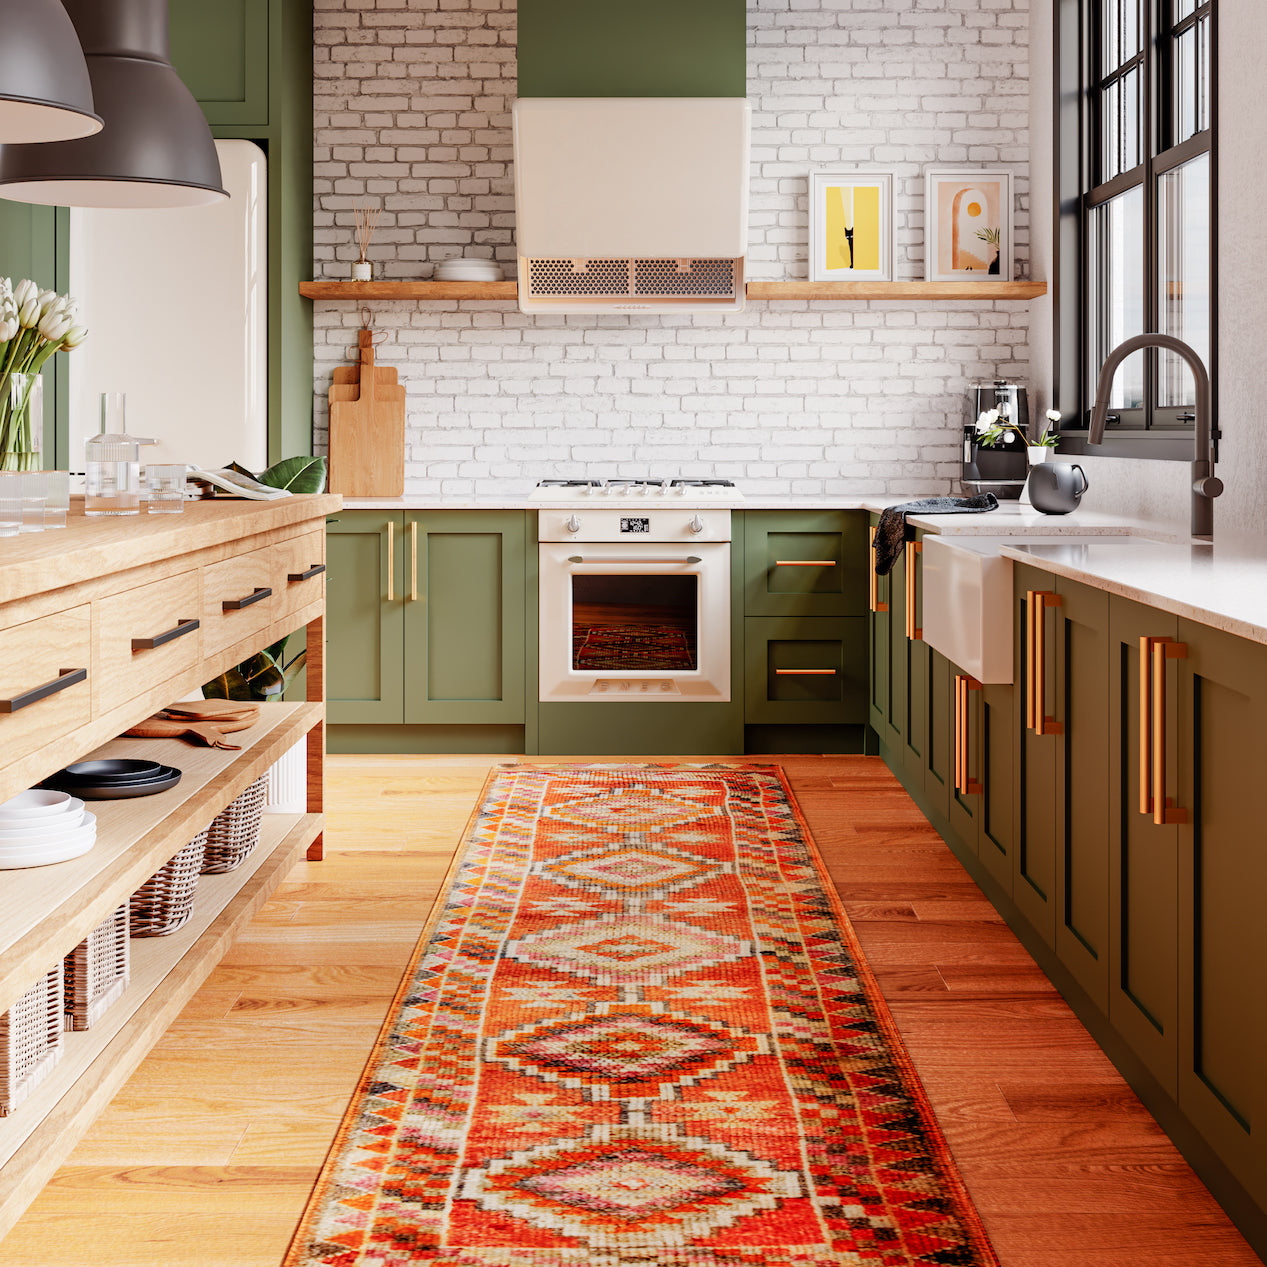 Kitchen Rug Inspiration: 25 Ideas to Enhance Your Floors